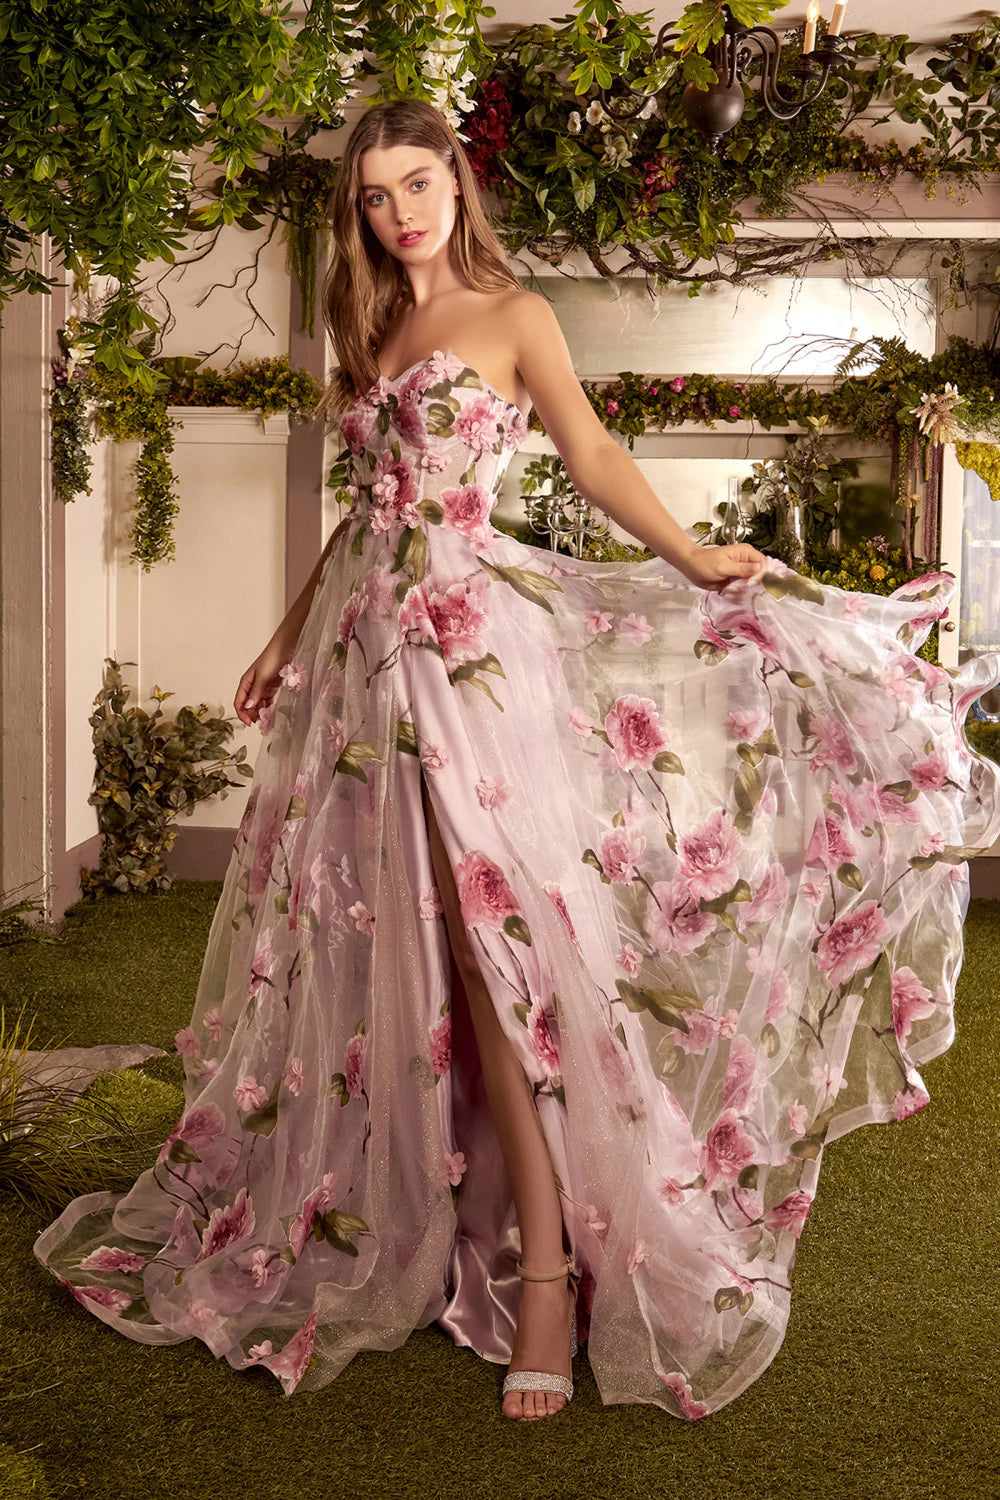 Andrea & Leo Couture A1035 Portrait of a Rose Printed Organza DressAndrea & Leo Couture A1035  Welcome to the fairytale world of magic and enchantment in this breathtaking A-line gown. This best selling gown is crafted from luxe Organza fabric, showing off an array of dimensional floral appliques and pink rose print. The strapless bodice features a sheer corset design, flaunting an ethereal blushing pink hue beneath a flourish of intricate roses and petals along the body. And